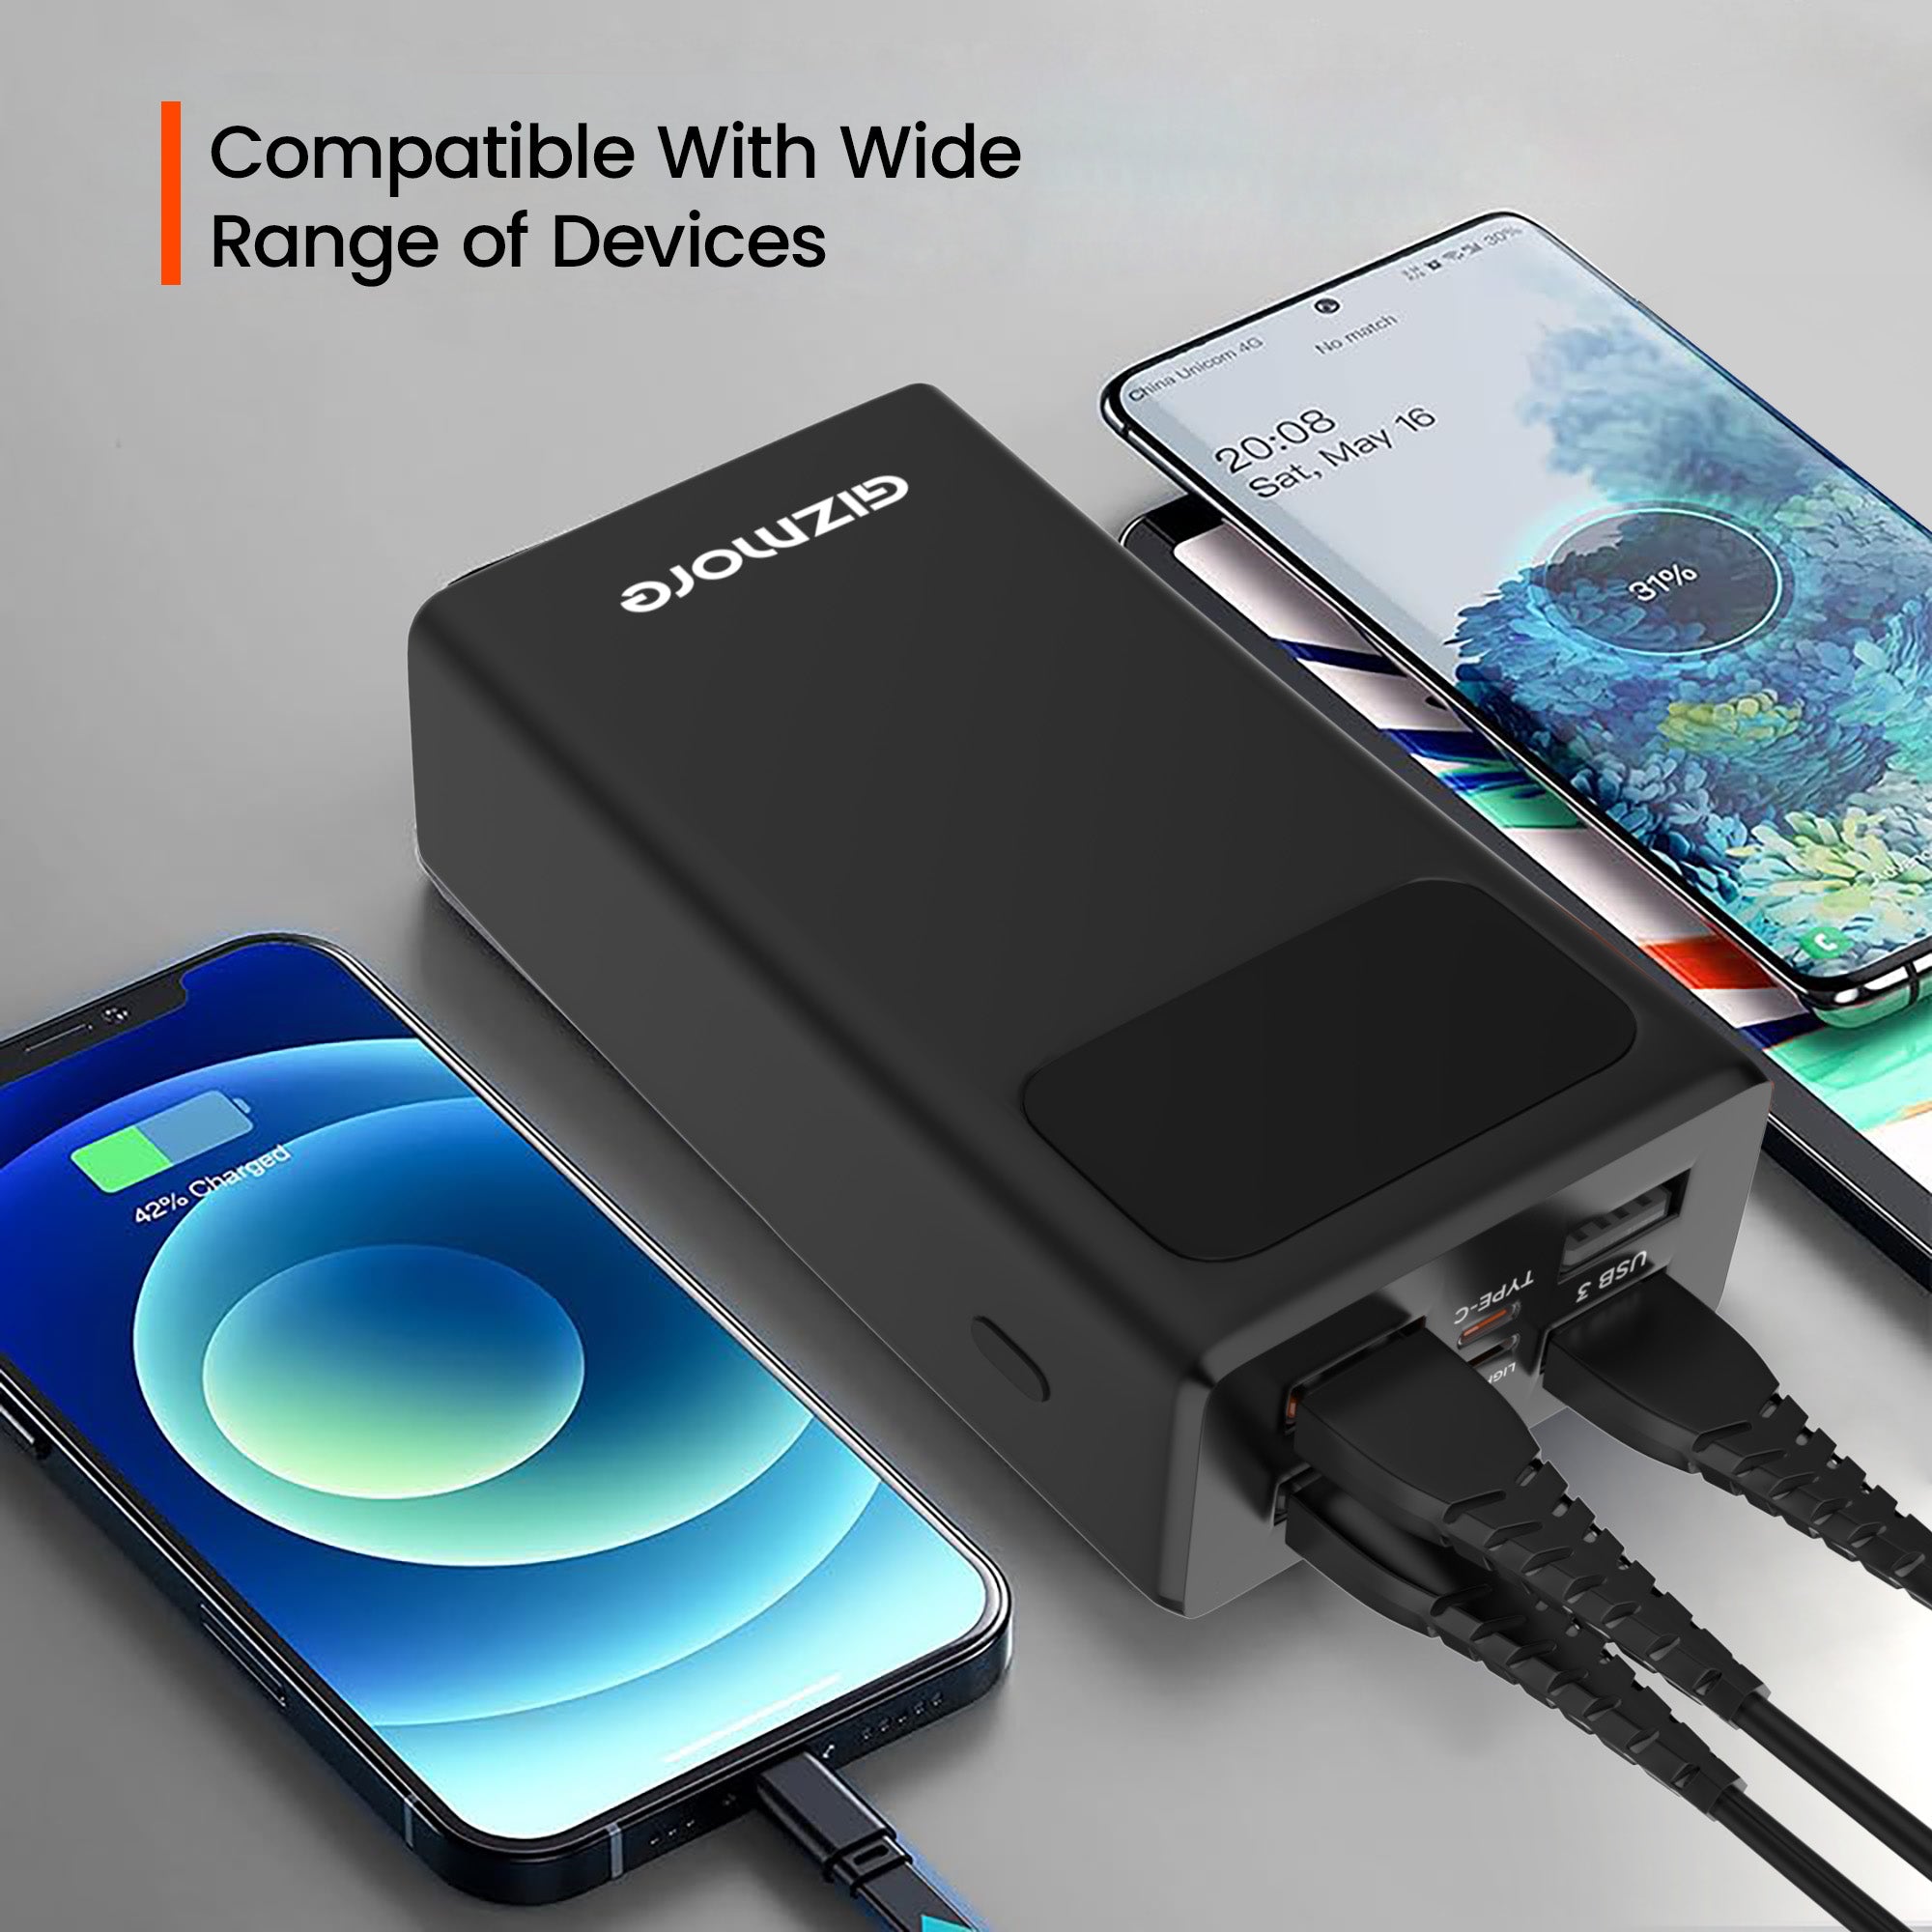 GIZMORE PD30KP 30000mAh PD Power Bank with Built-In Charging Cables|22W Super-Fast Charging | 4 USB Output| Type C (Input & Output) |Lightning Input Port| Li-Polymer Power Bank for iPhones, Smartphones & Tablets (Black)